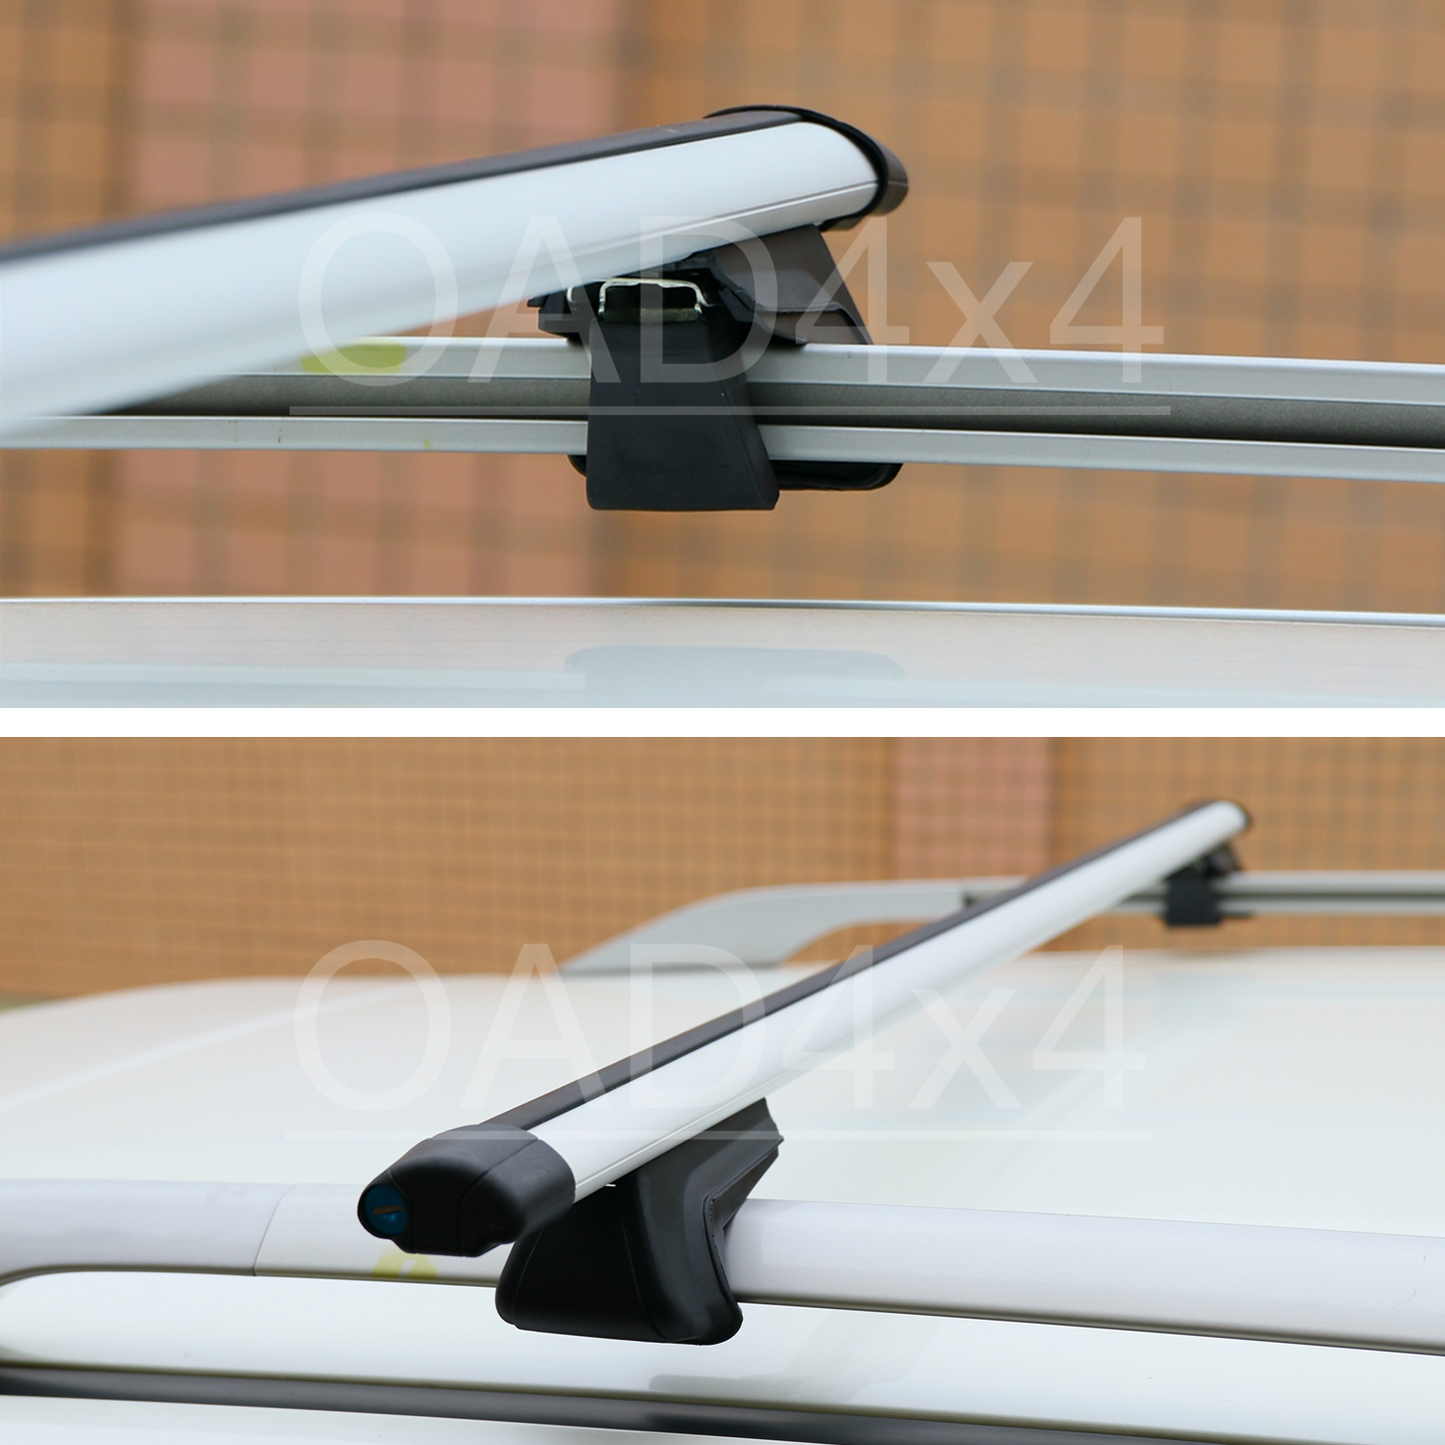 1 Pair Aluminum Silver Cross Bar Roof Racks Baggage holder for Peugeot 308 wagon 08-13 with raised roof rail